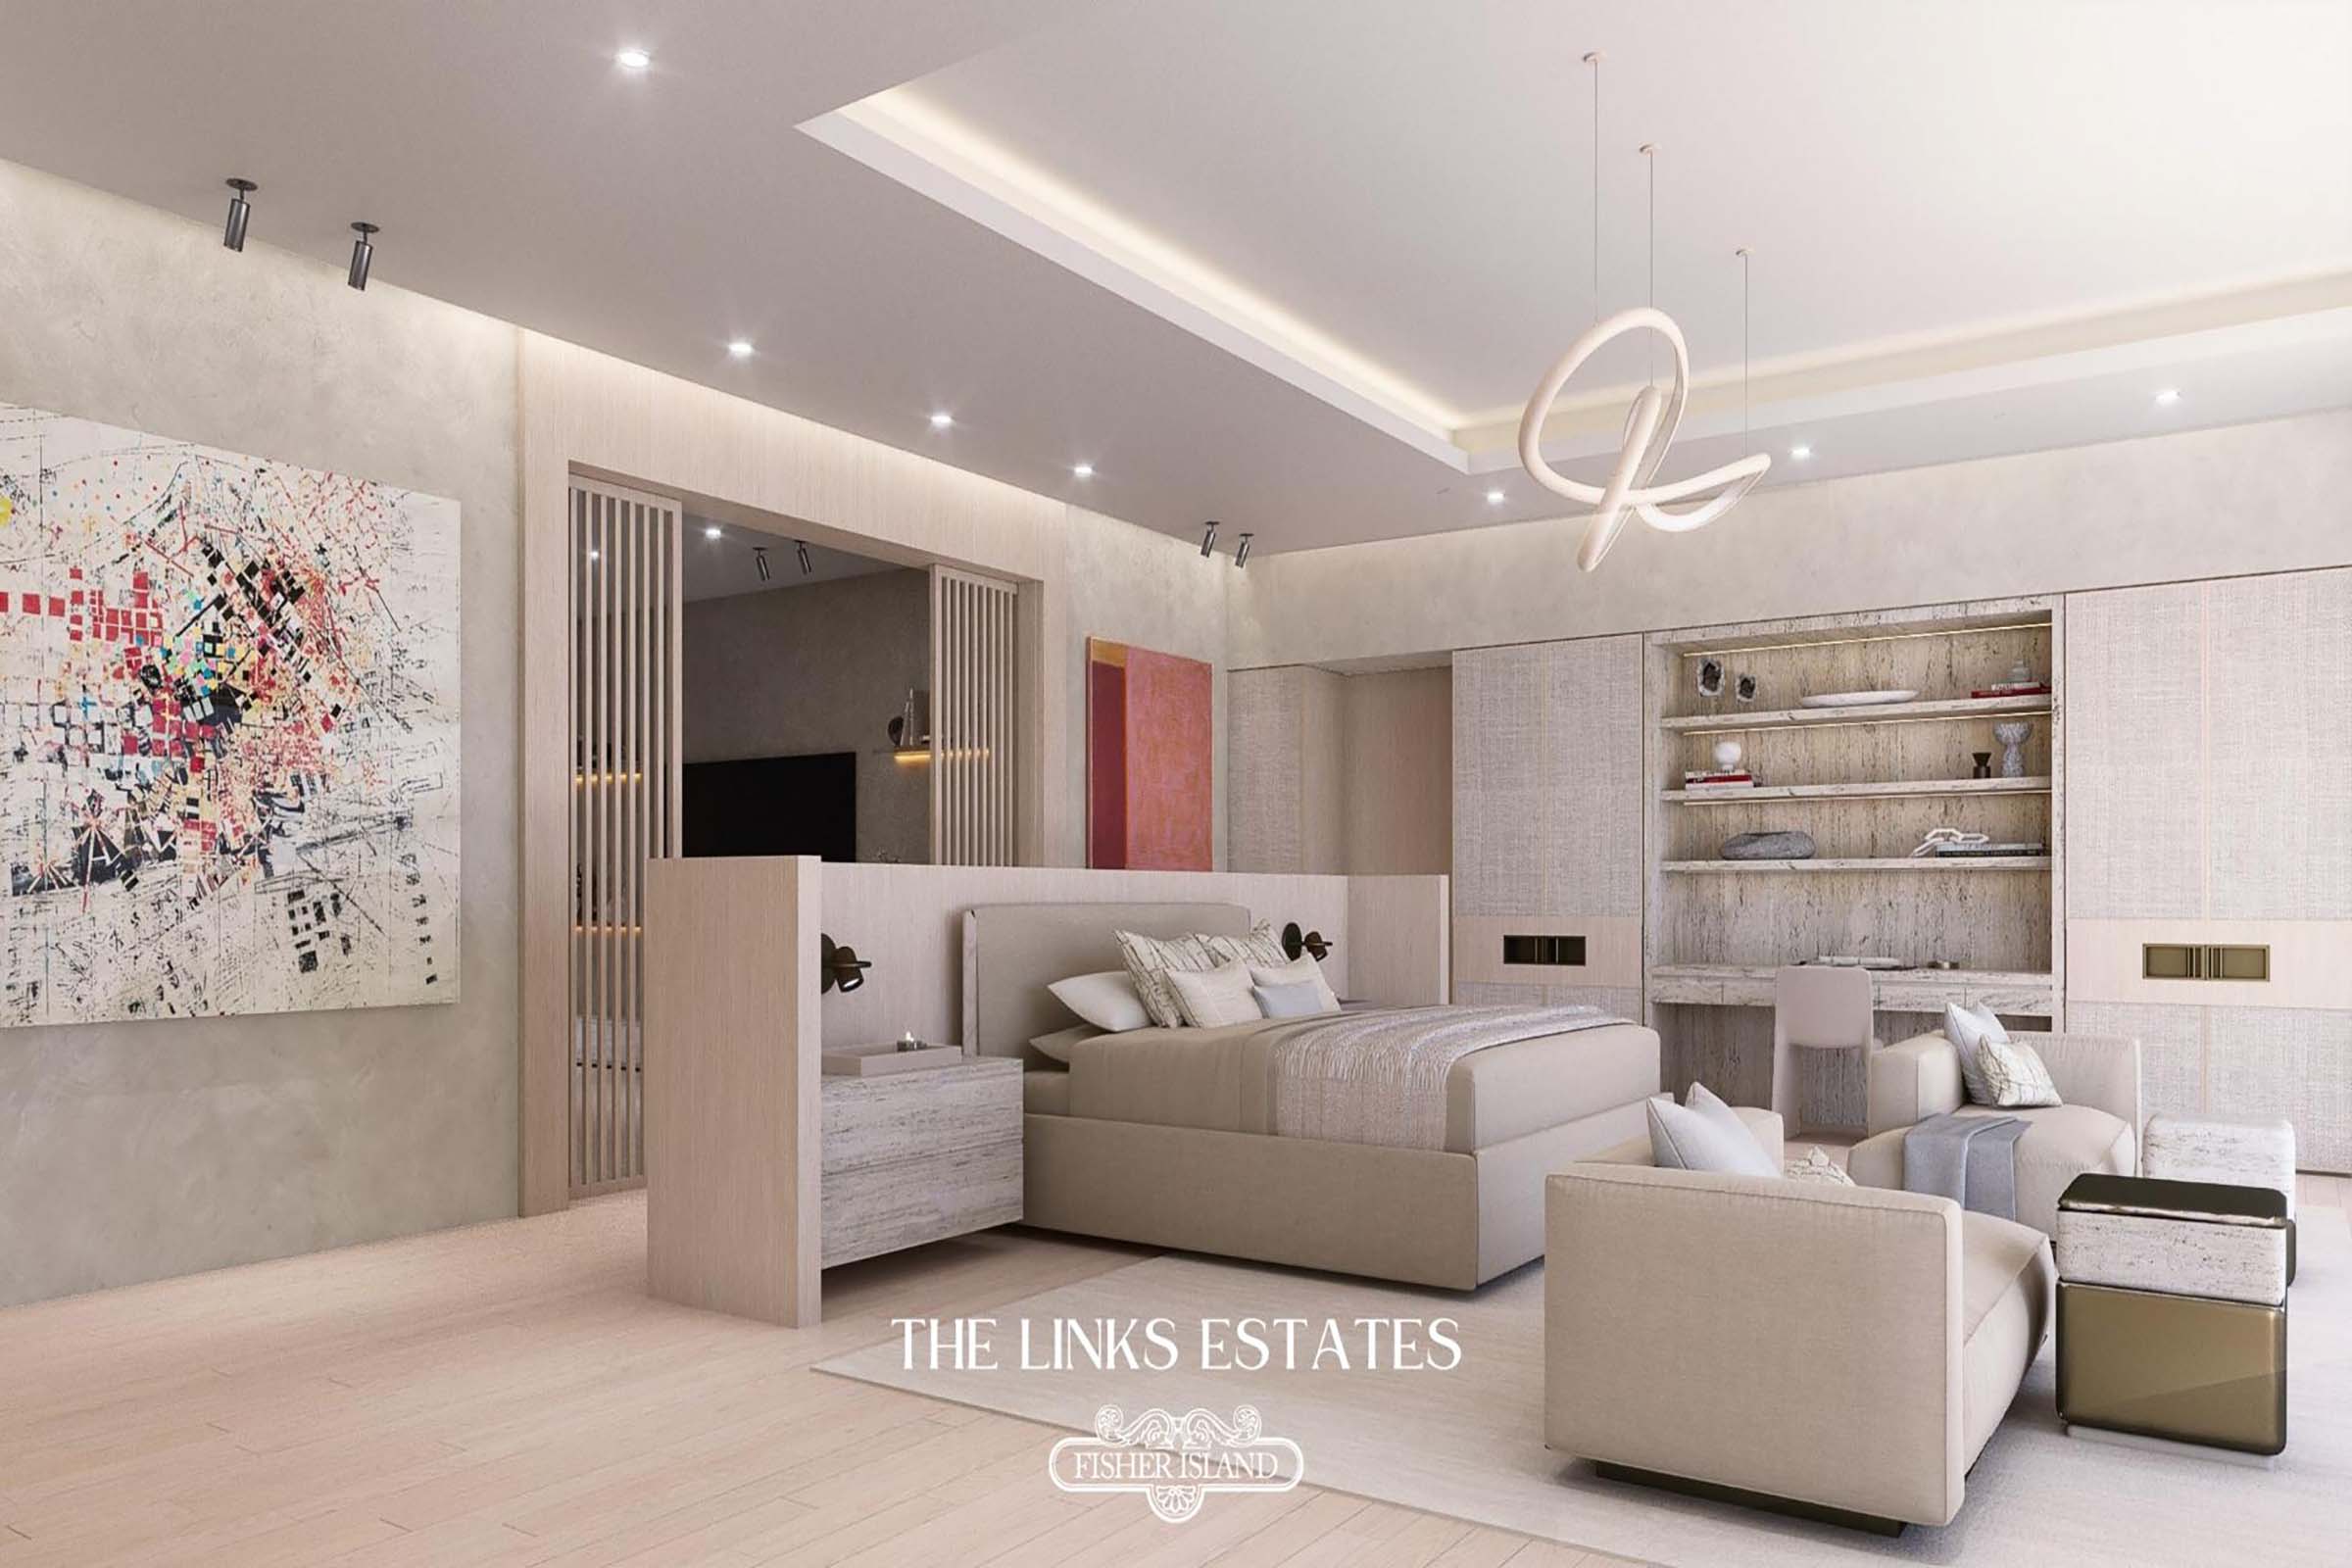 Rendering of The Links Estates Fisher Island Residence 5 Primary Suite